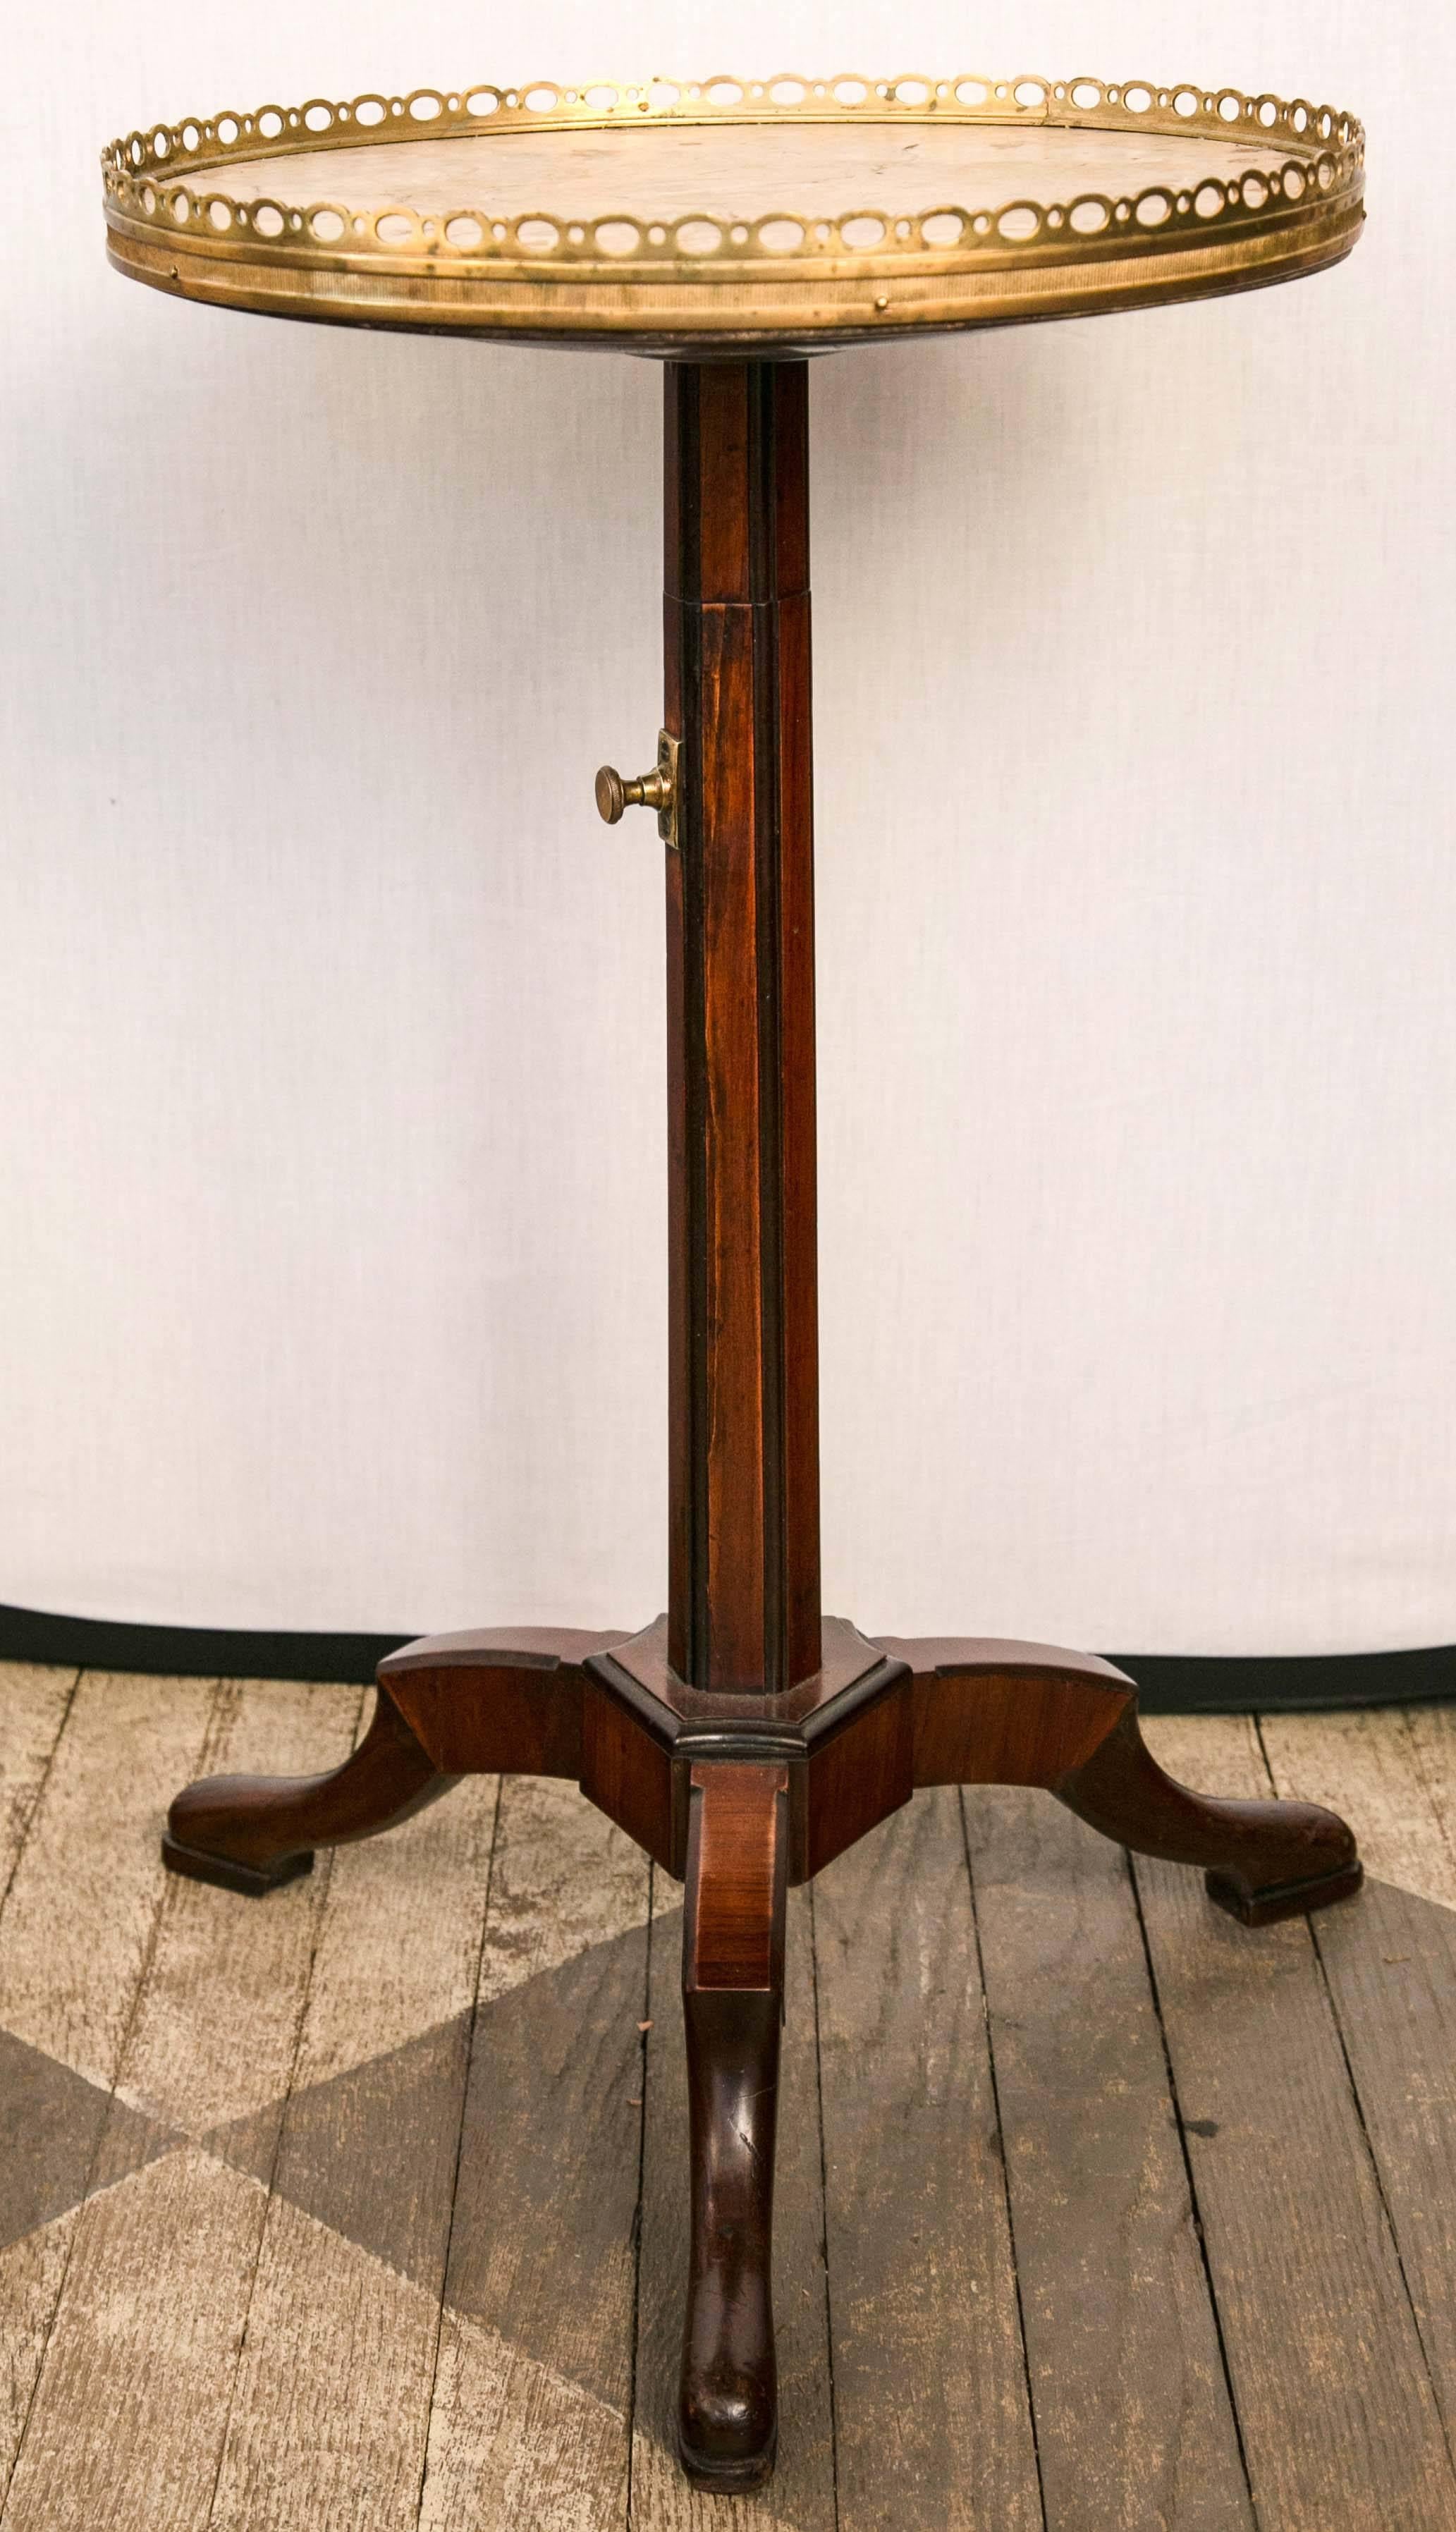 This very unusual French petit gueridon has a center column which telescopes up to a maximum height of 33 inches. A brass fitting allows for many different height adjustments with the holes drilled into the mechanism.
There is a brass gallery